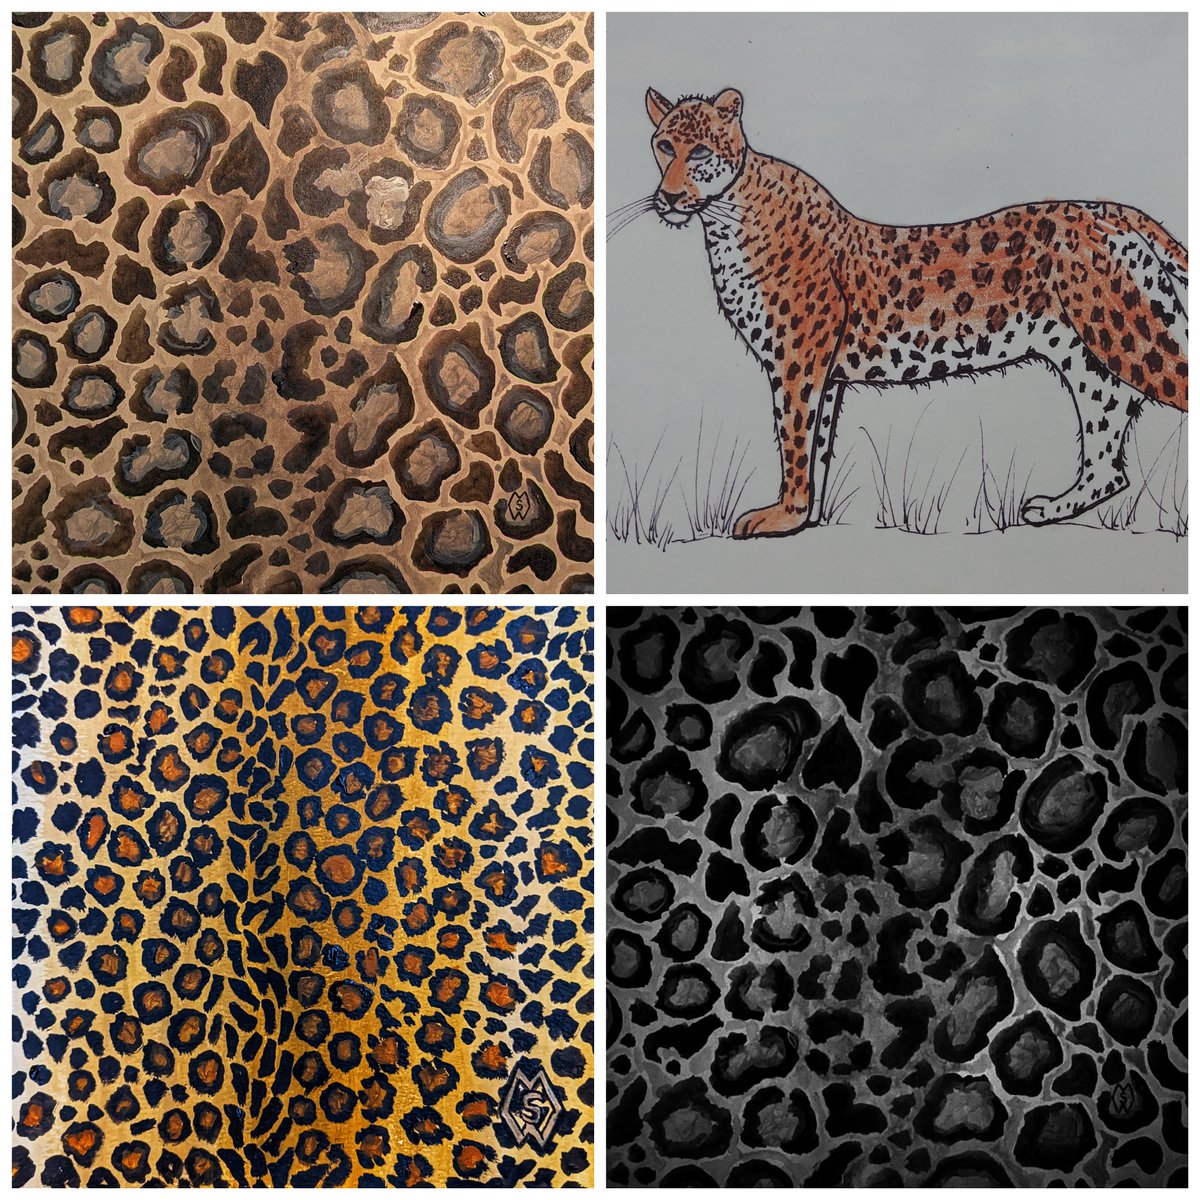 May 3rd is International Leopard Day. Here are some of my works of art with leopards.  teepublic.com/t-shirt/285684…
#mattstarrfineart #artistic #paintings #artforsale  #gift #giftideas #tshirts #homedecor #art #leopard #leopards #jungle #animal #zoo #spots #wildlife #Africa